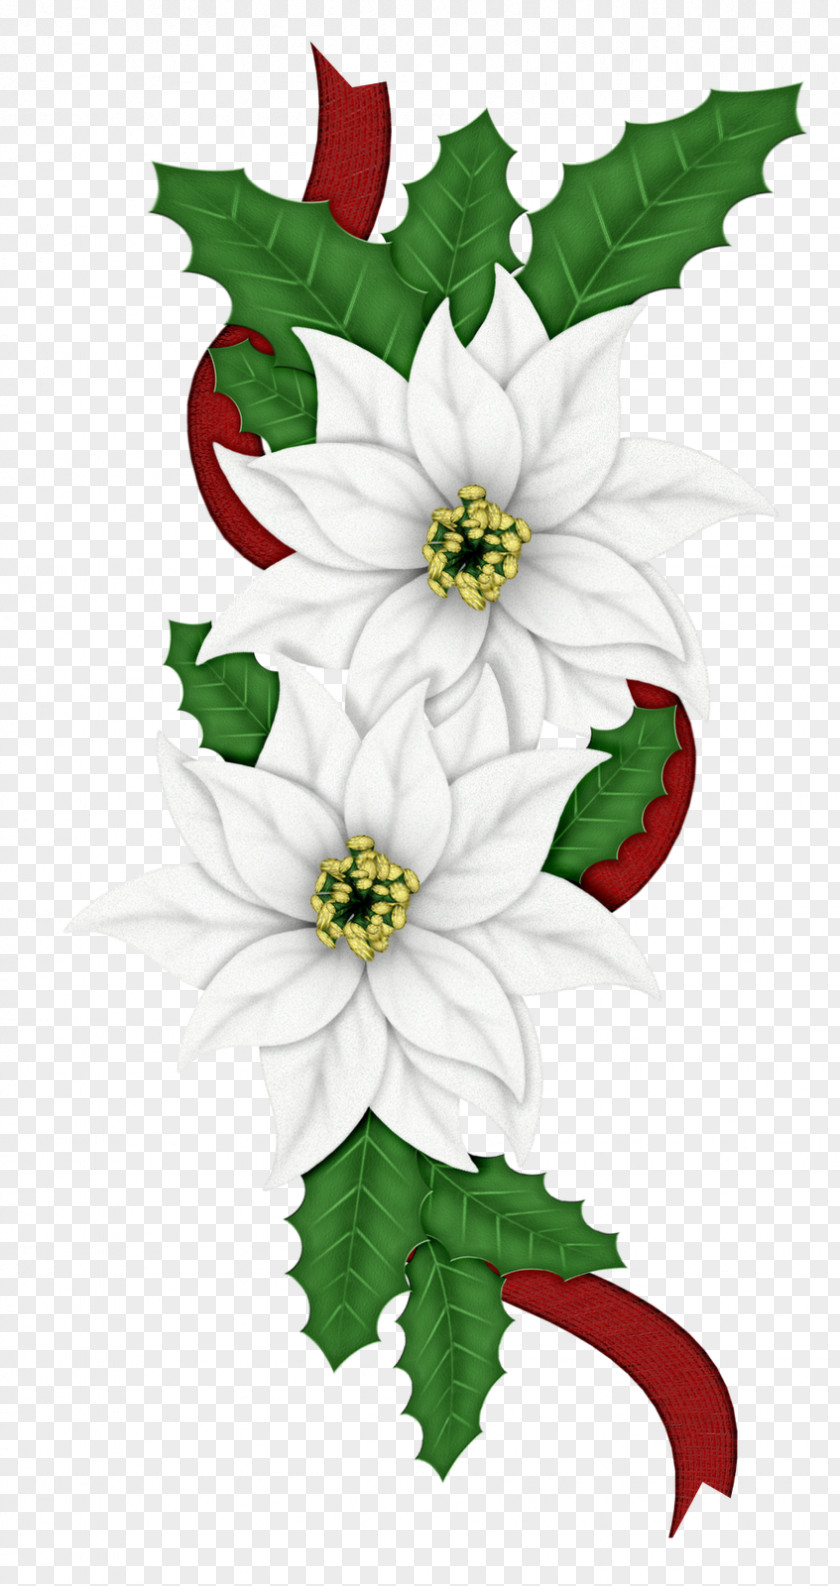 Christmas Poinsettia Candy Cane Flower Clip Art PNG